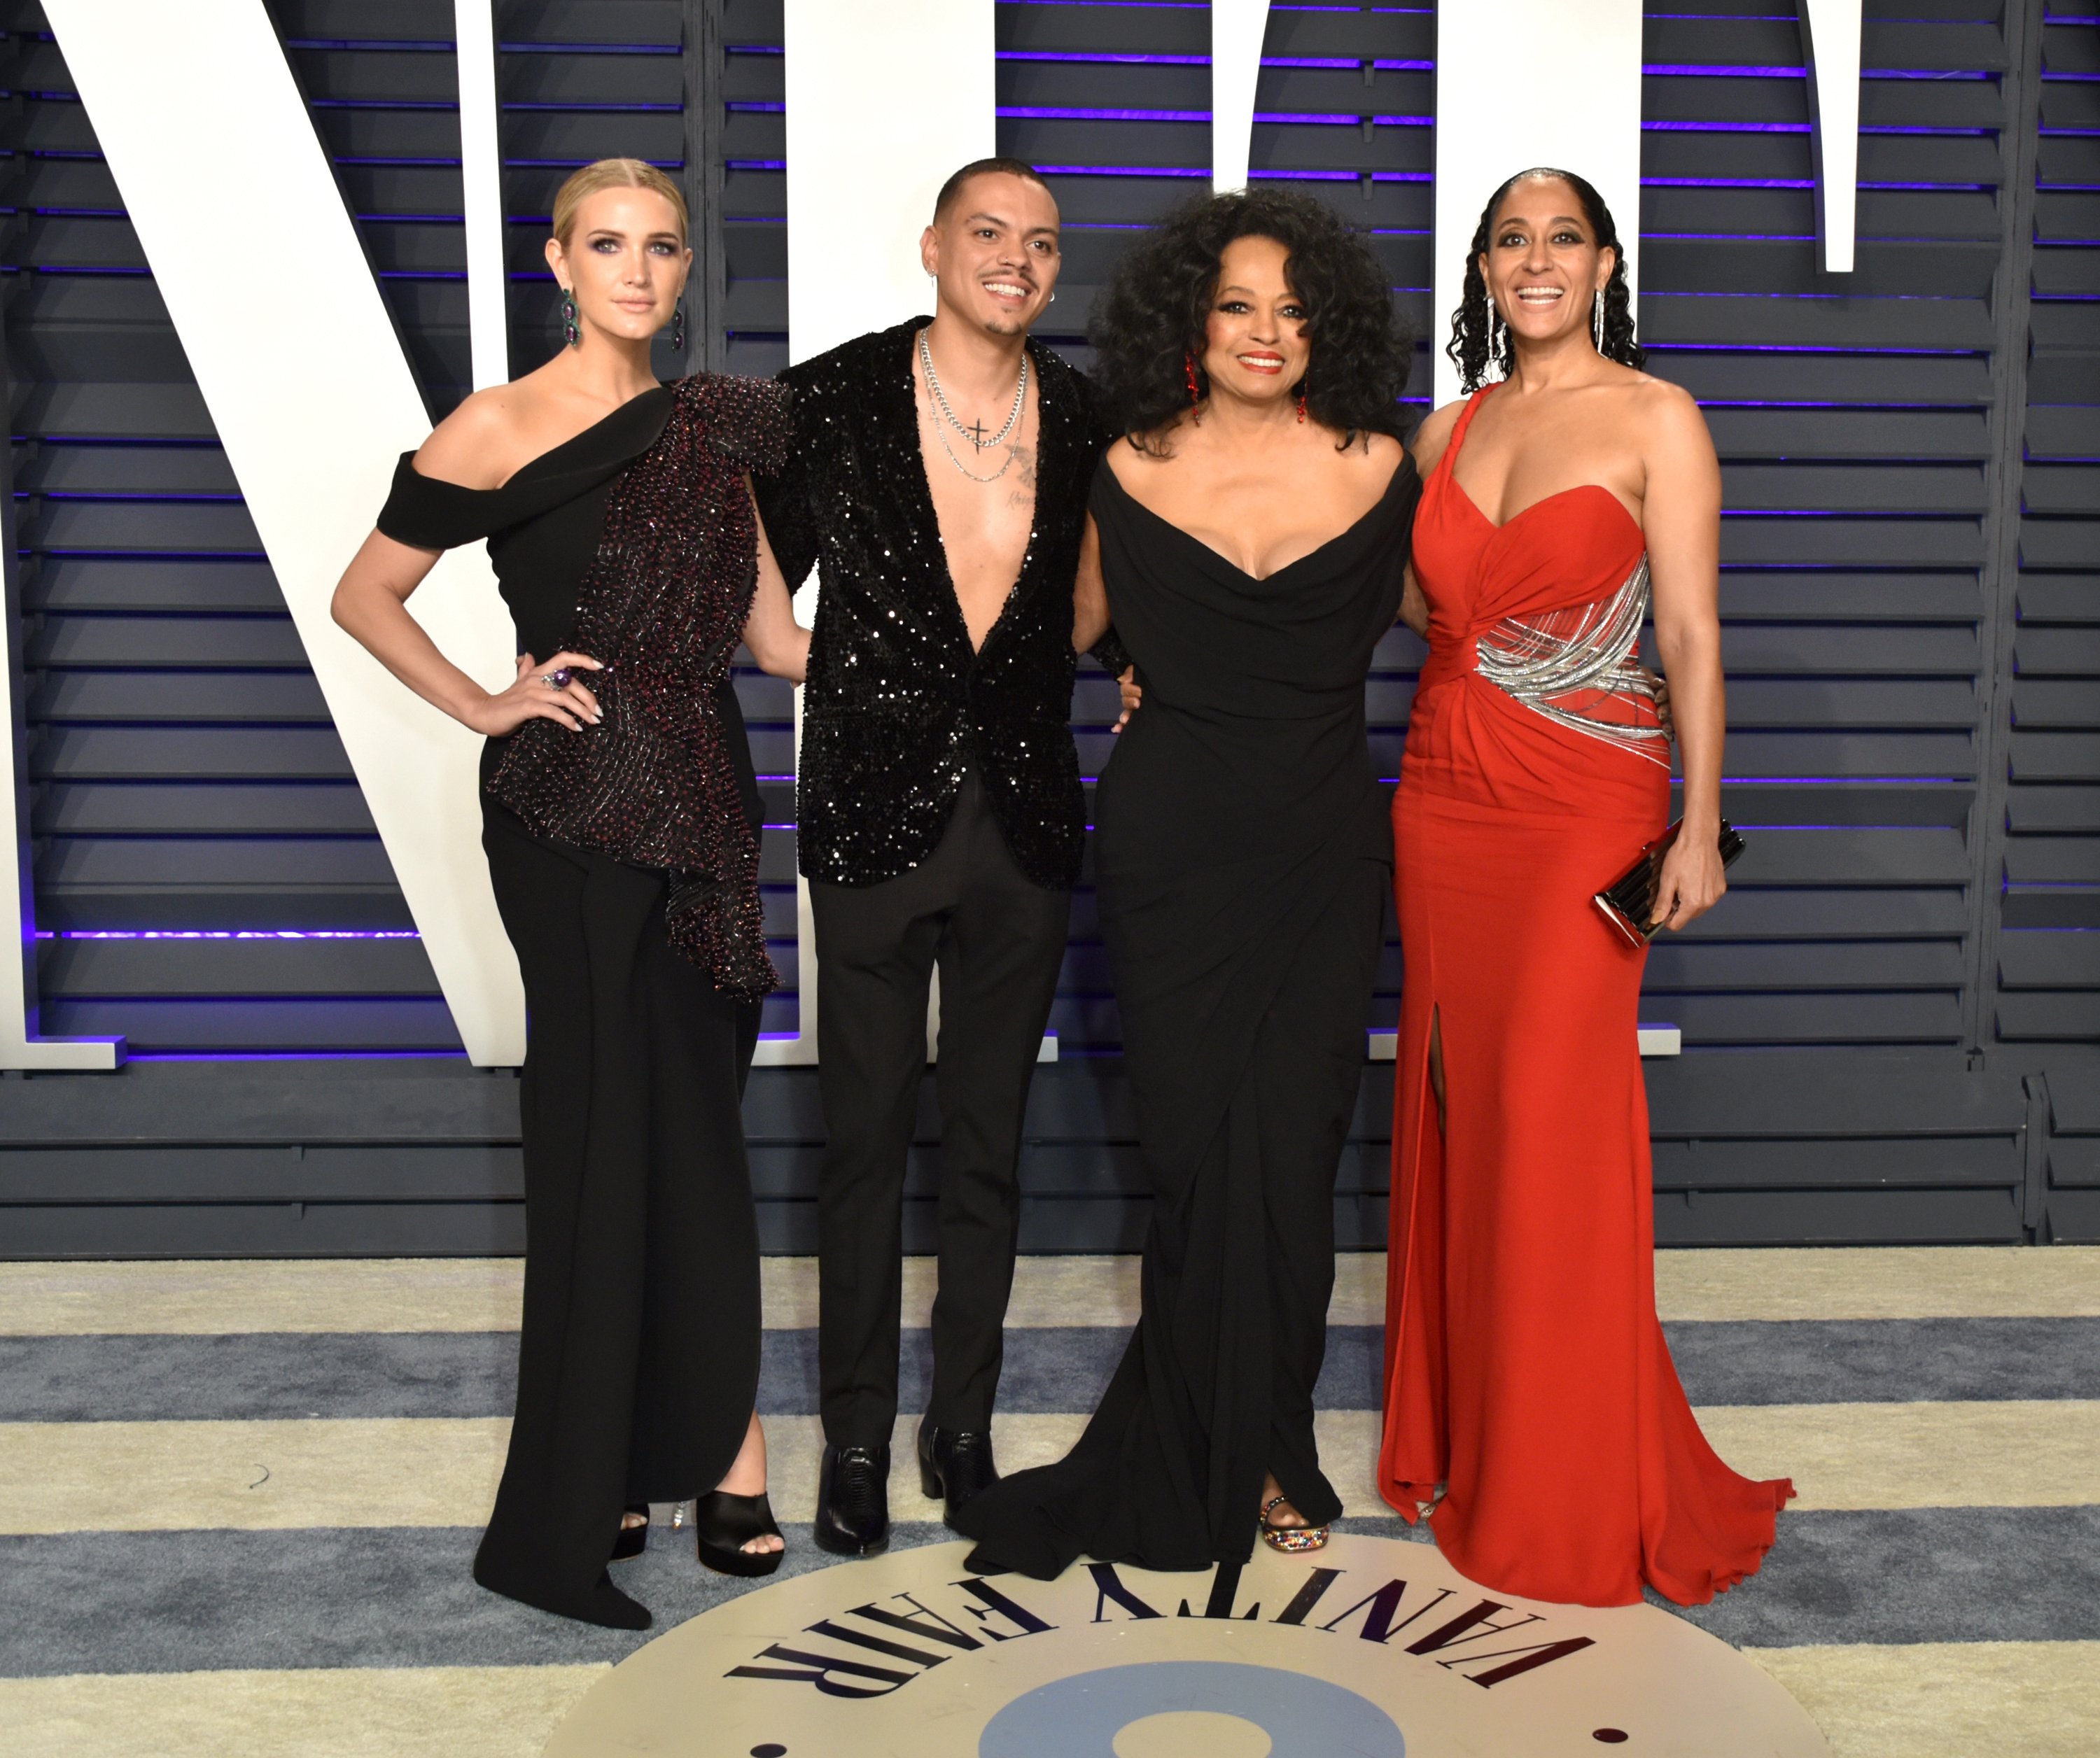 Ashlee Simpson, Evan Ross, Diana Ross, and Tracee Ellis Ross at  the 2019 Vanity Fair Oscar Party | Photo: Getty Images